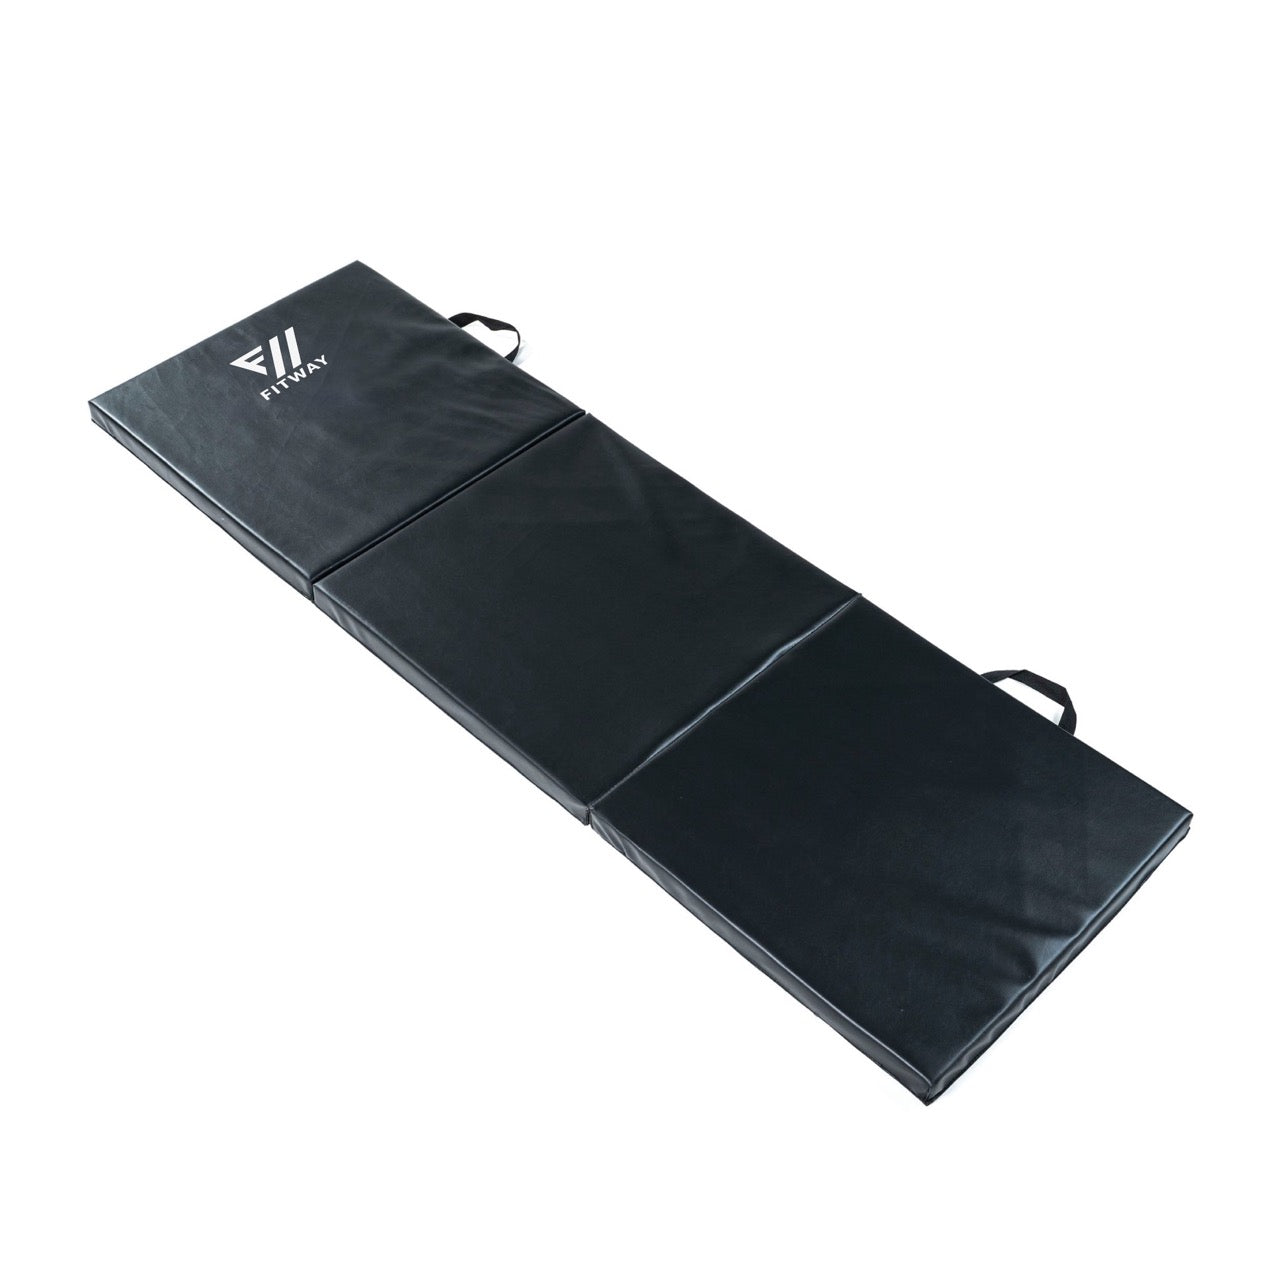 FitWay Equip. Folding Exercise Mat - 71" x 24"